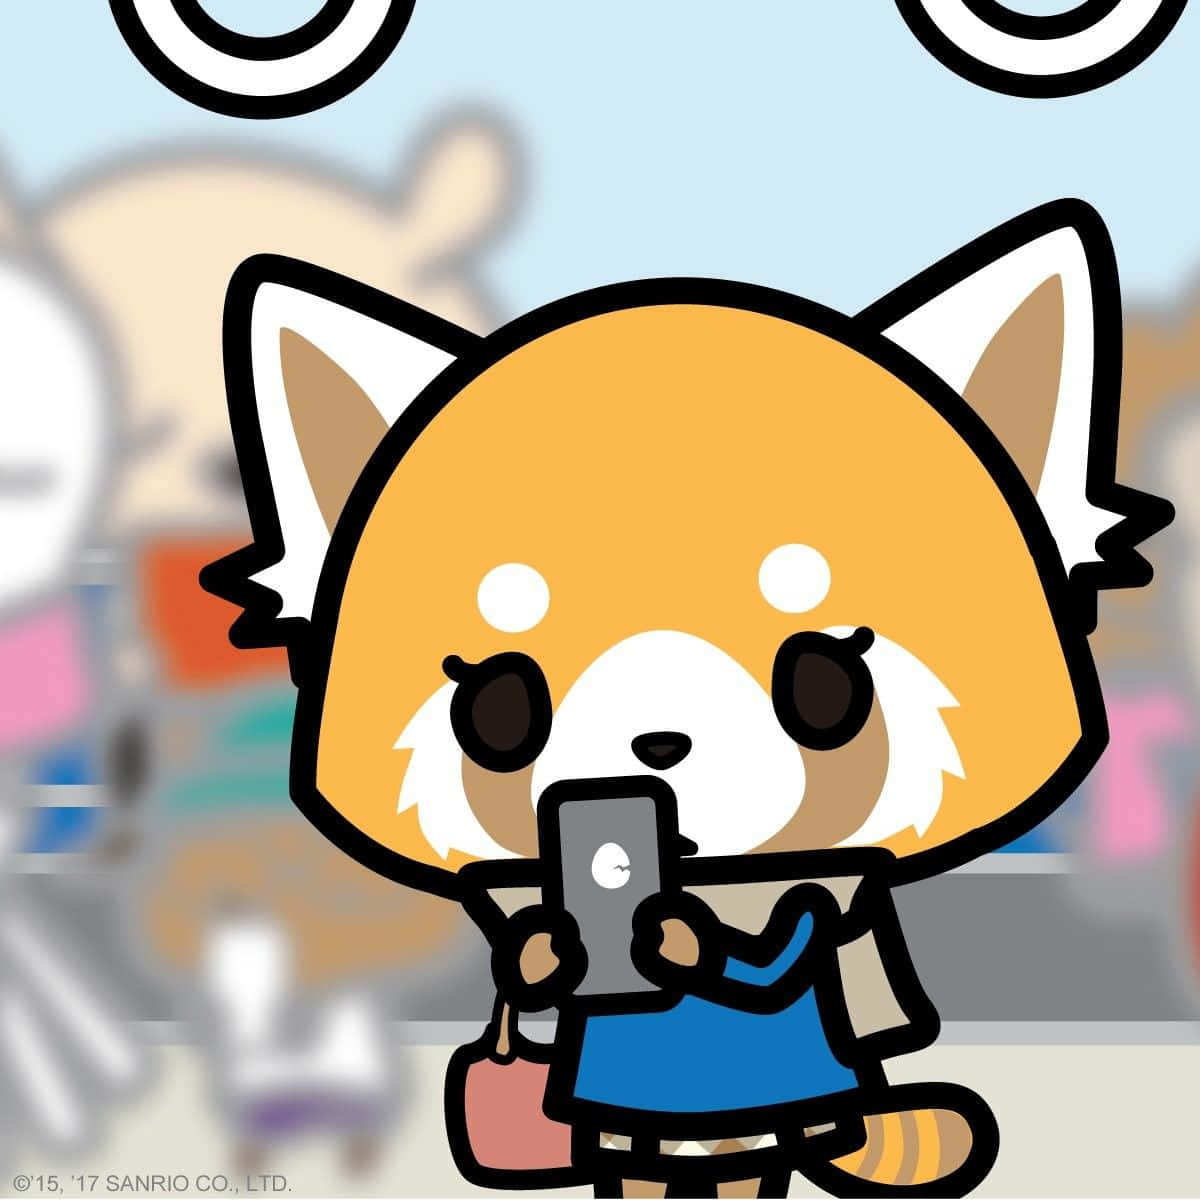 Meet Aggretsuko - An Office Lady Who Loves Death Metal